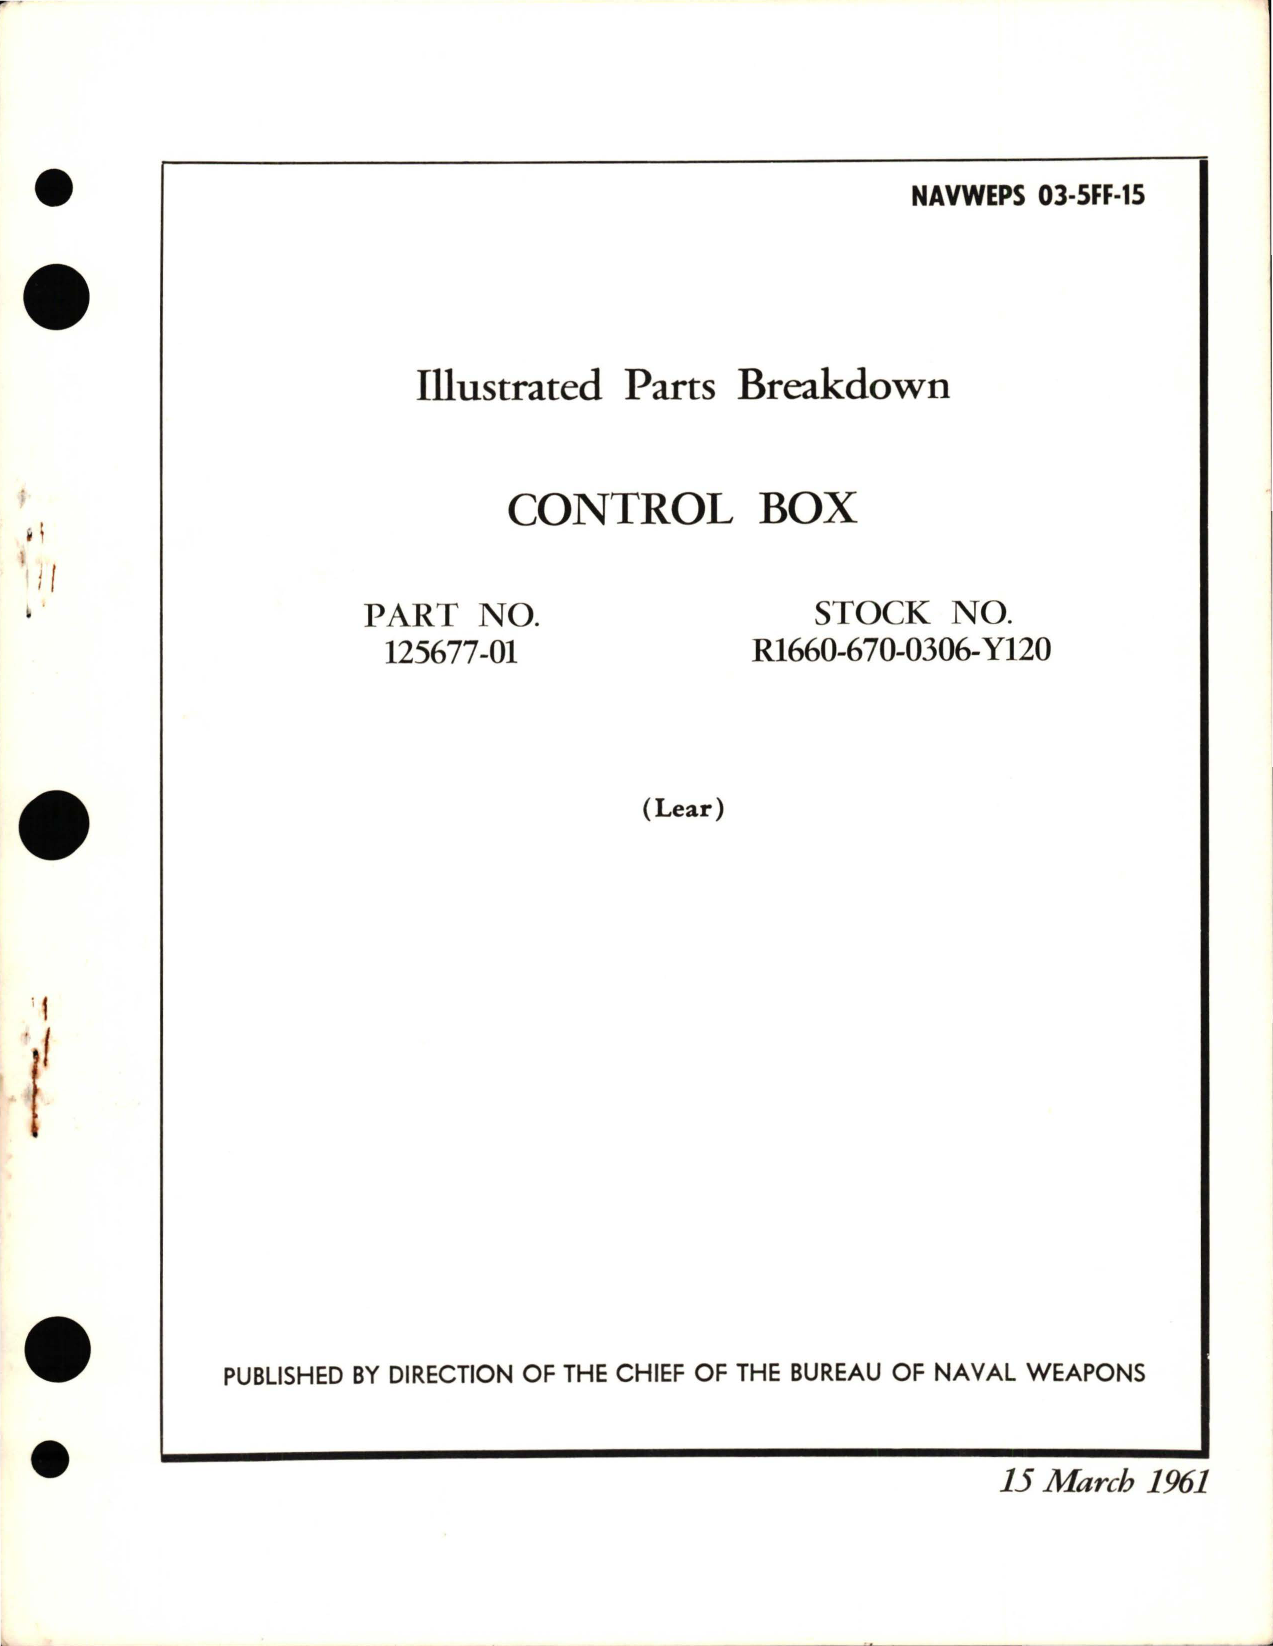 Sample page 1 from AirCorps Library document: Illustrated Parts Breakdown for Control Box - Part 125677-021 